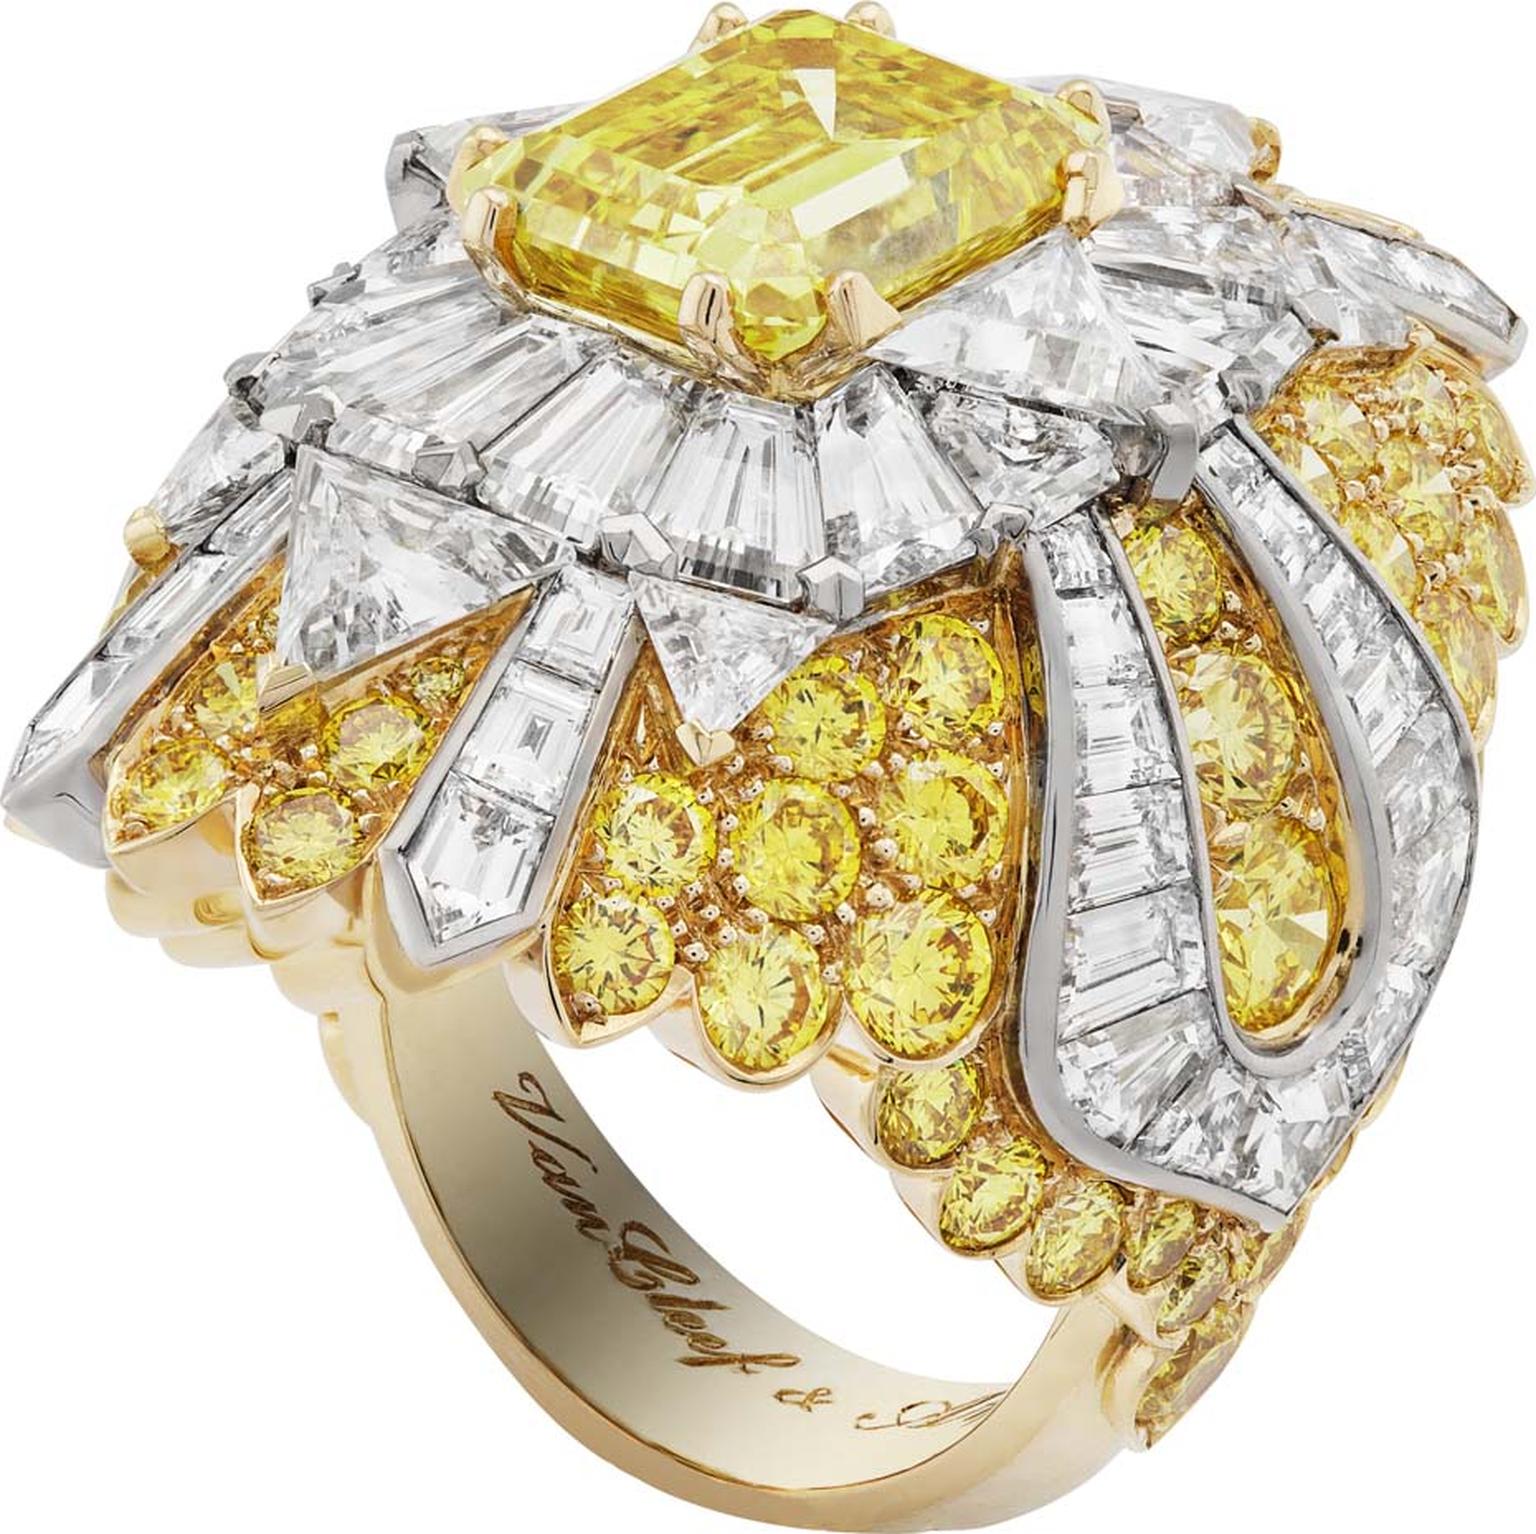 Van Cleef & Arpels Peau d'Ane Happy Marriage collection Heavenly Beauty ring in white and yellow gold with a central Vivid yellow emerald-cut diamond, white trillion-cut diamonds and round and fancy-cut yellow diamonds.